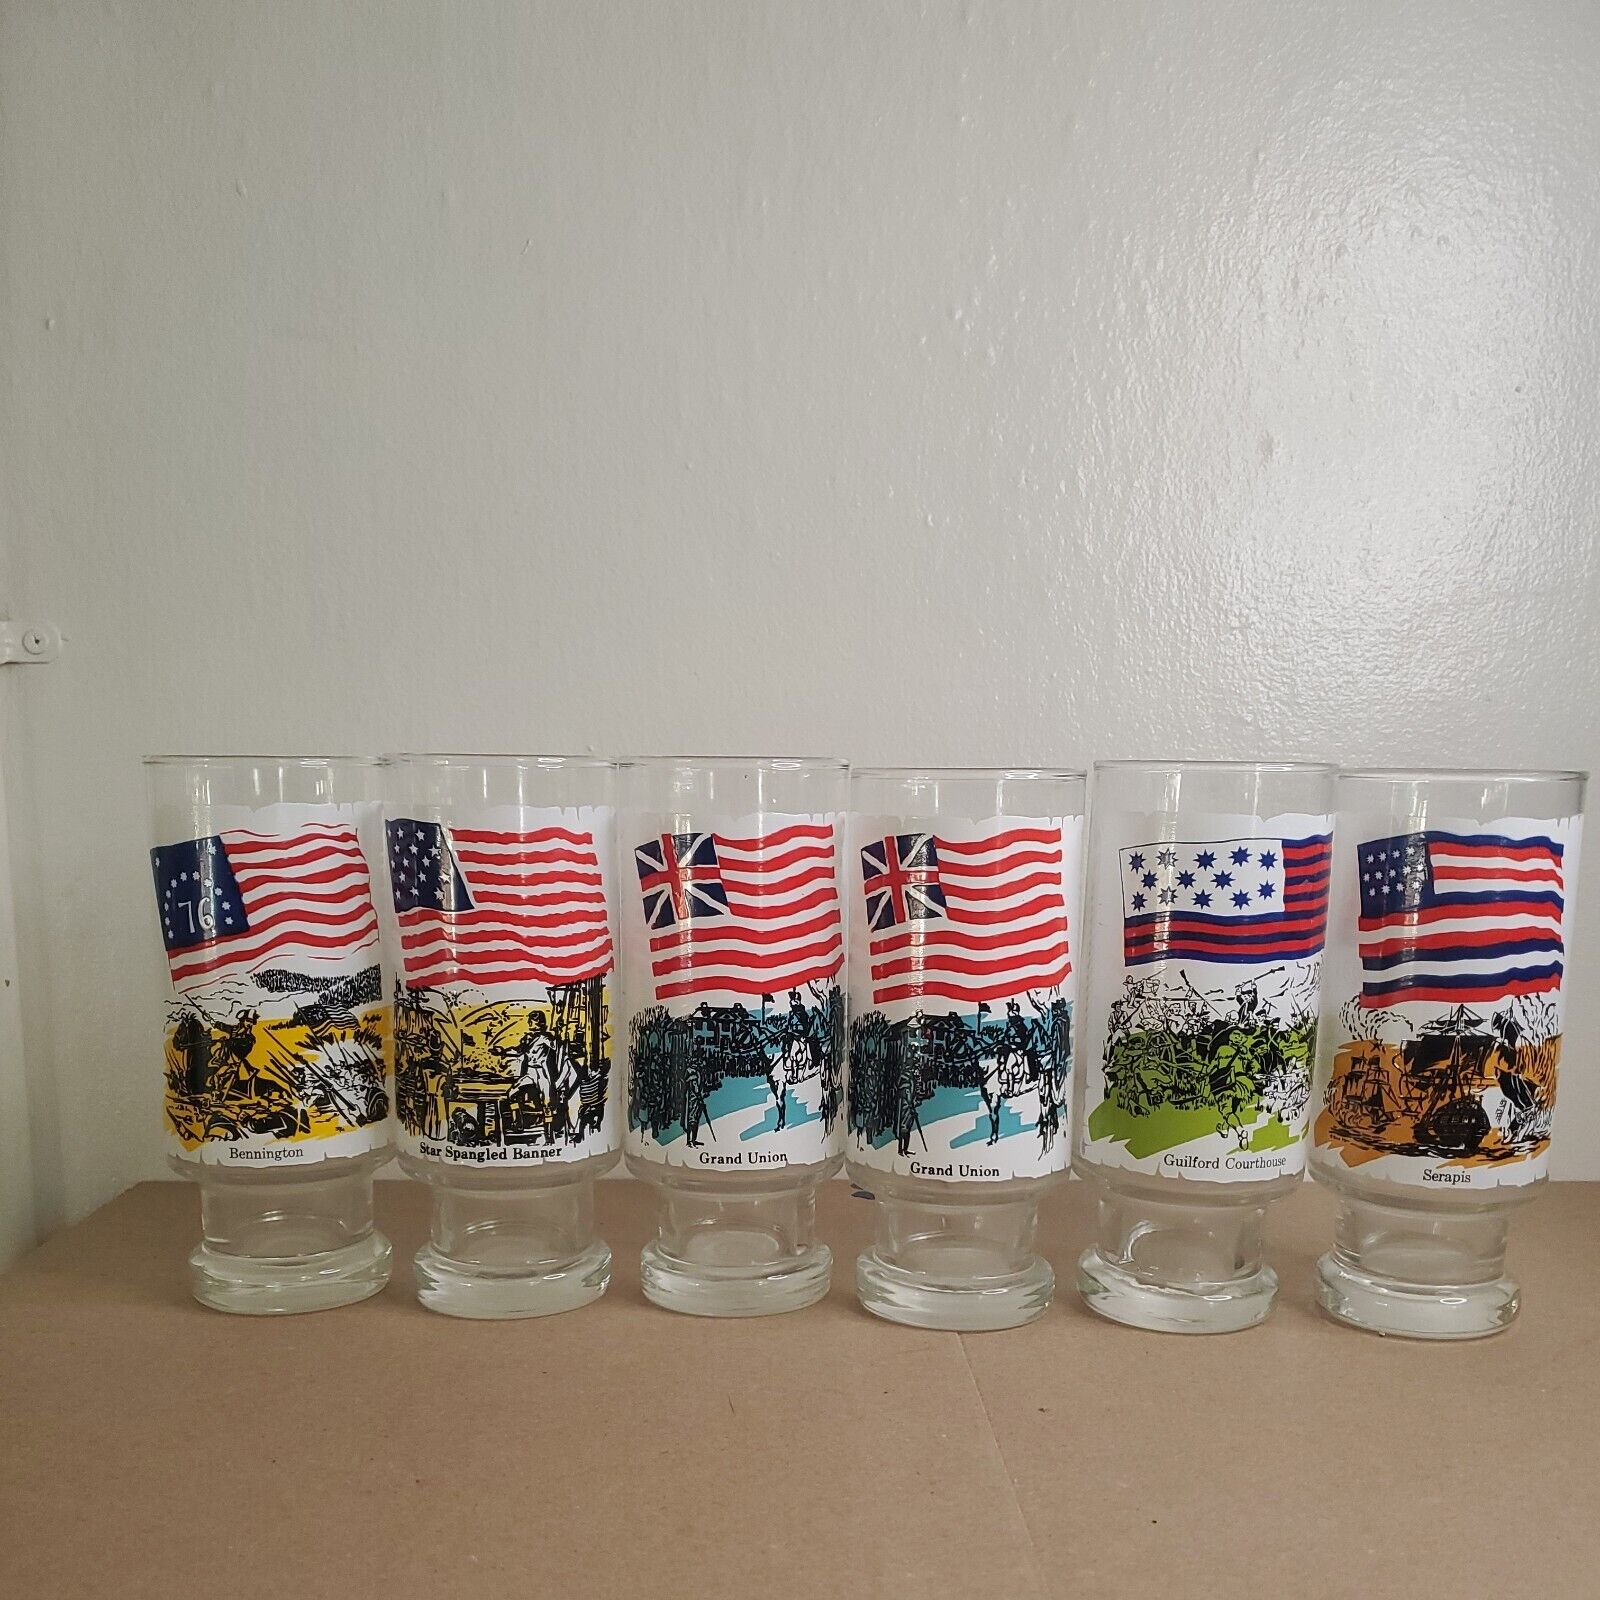 VTG 1970's National Flag Foundation Collector's Drinking Glasses lot of 6 Cups